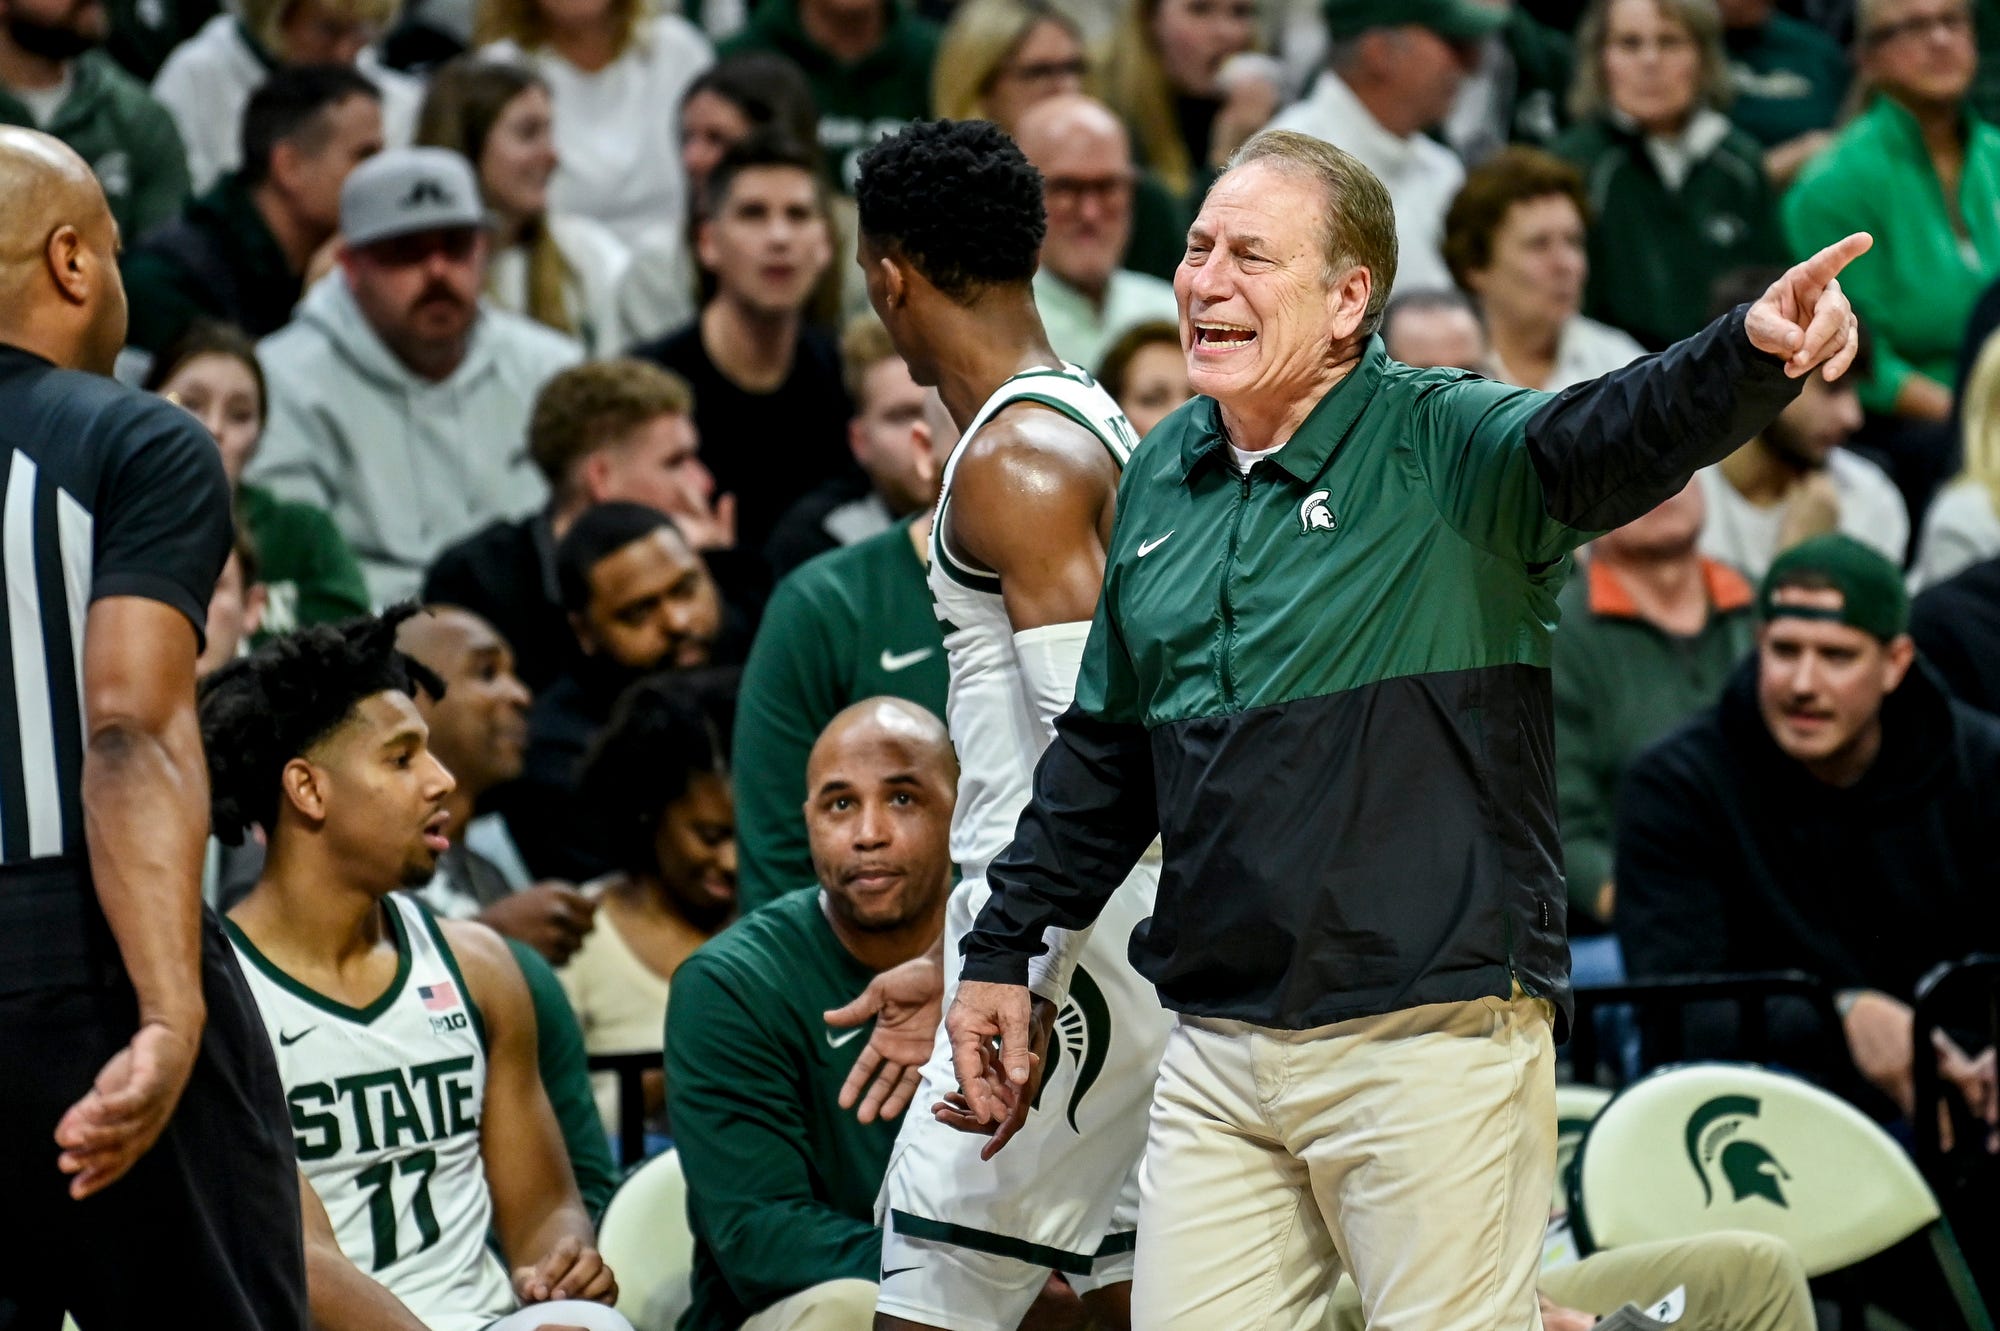 MSU basketball: Thomas Kelley hired as assistant coach on Izzo's staff